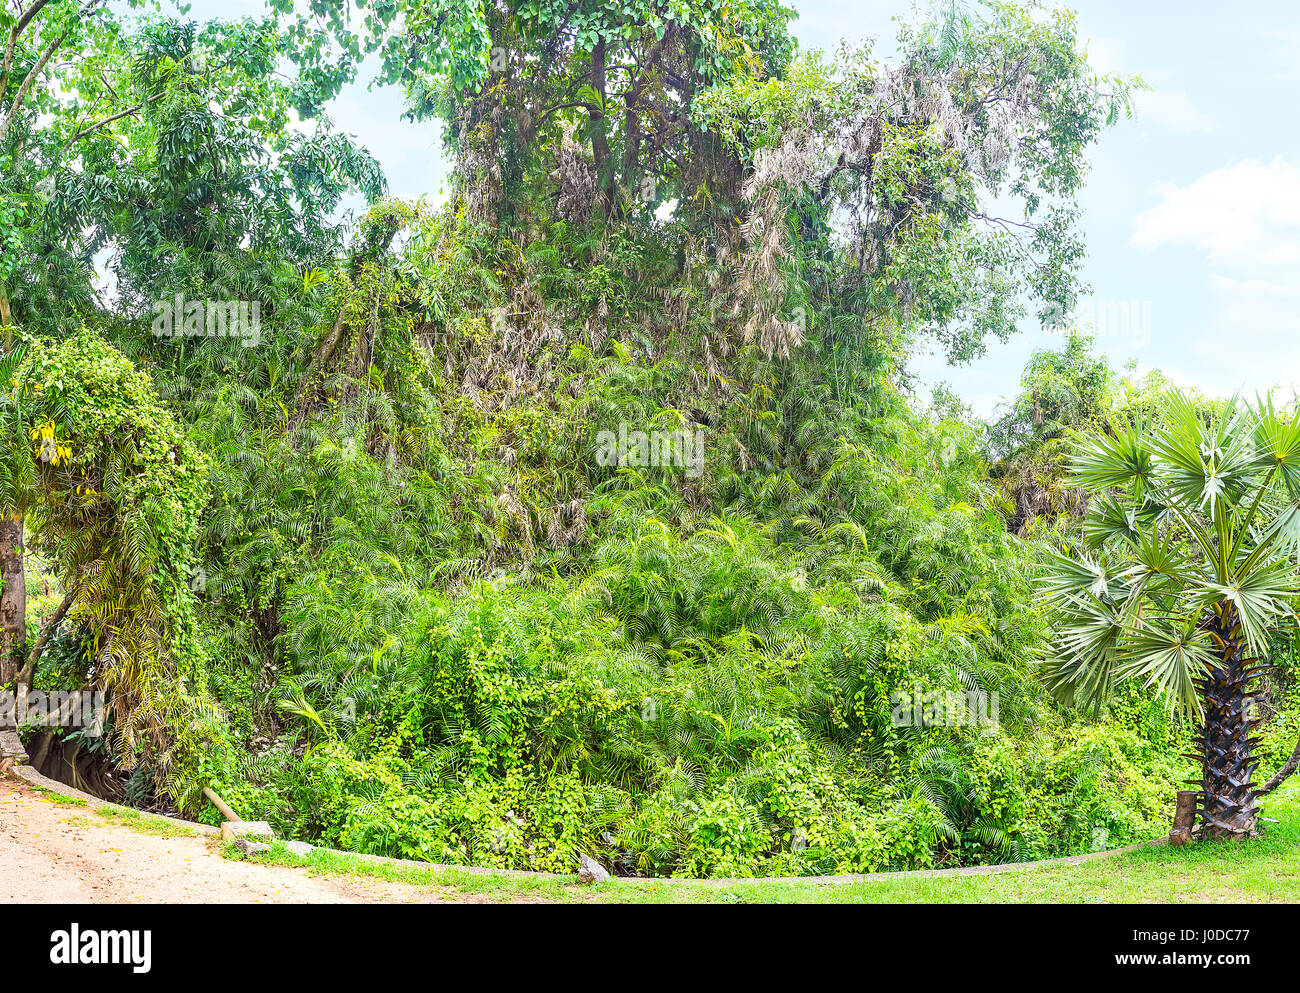 The tree at the bank of pond is covered with liana vines, Deepa Garden, Polonnaruwa, Sri Lanka. Stock Photo